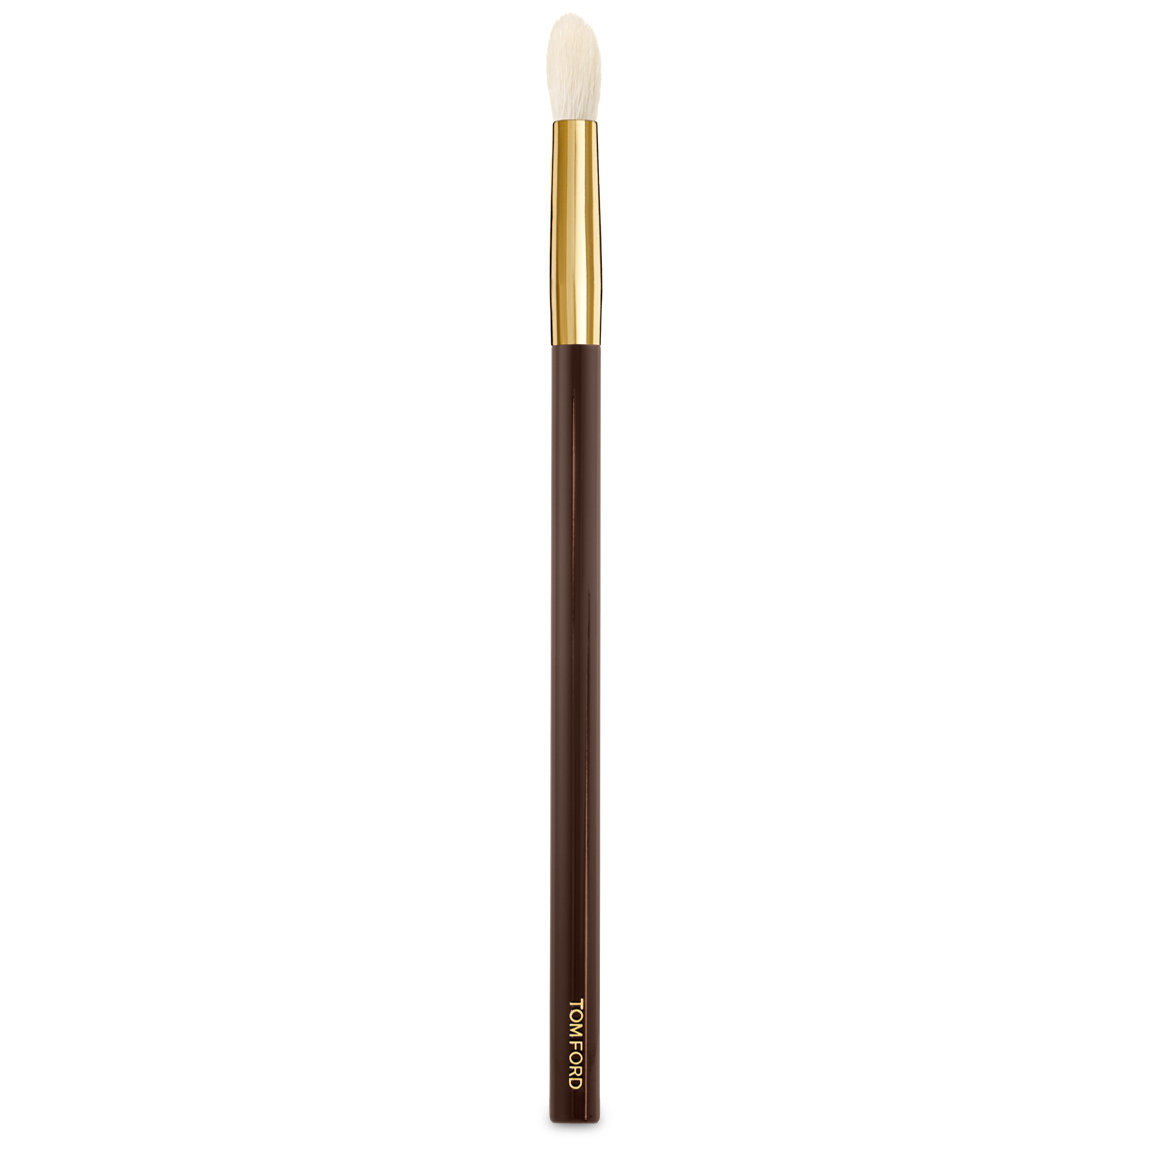 TOM FORD Eye Shadow Blend Brush 13 alternative view 1 - product swatch.